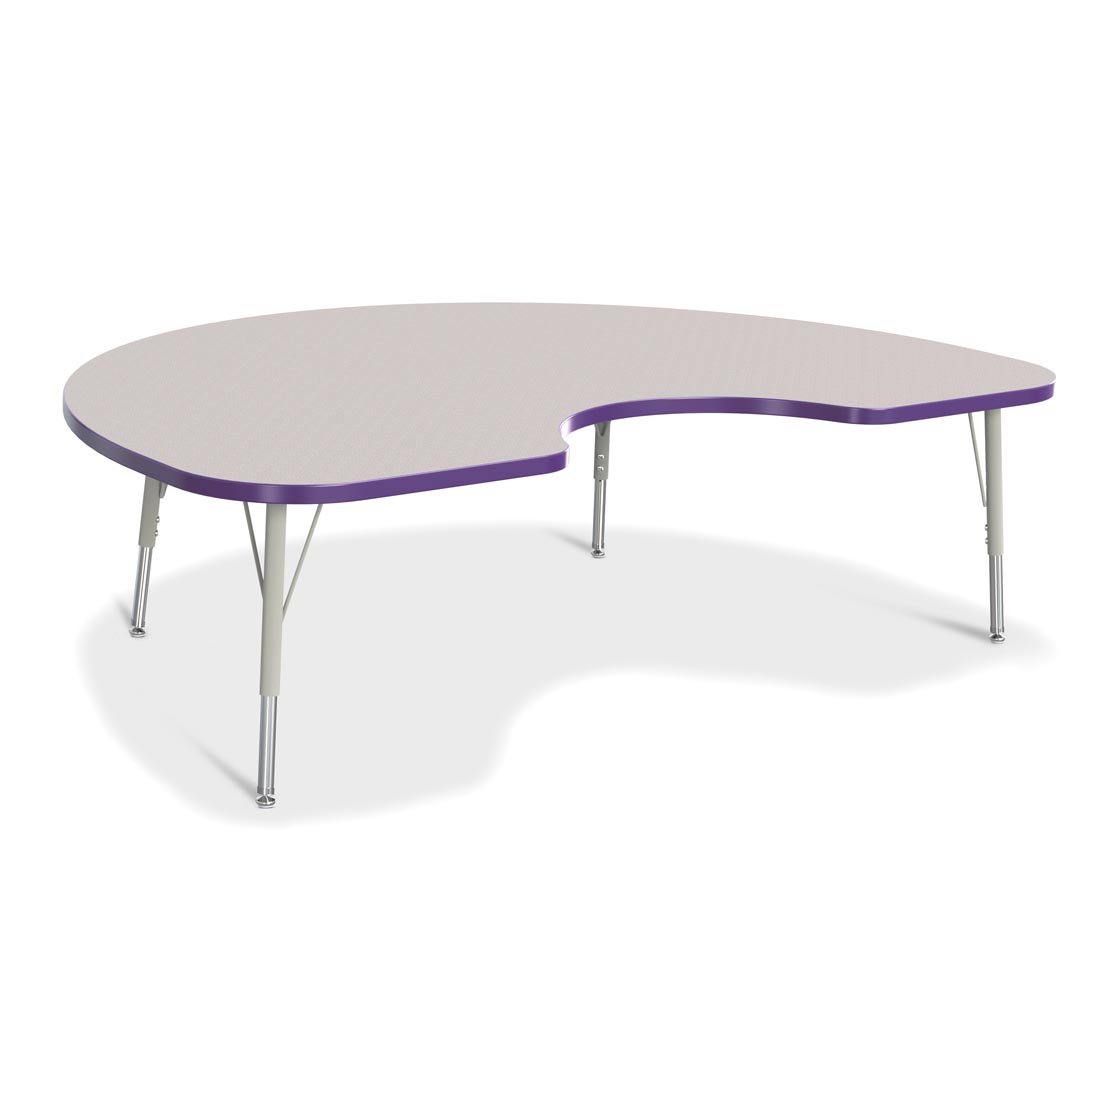 Berries Kidney Activity Table Elementary Height Gray With Purple Edge